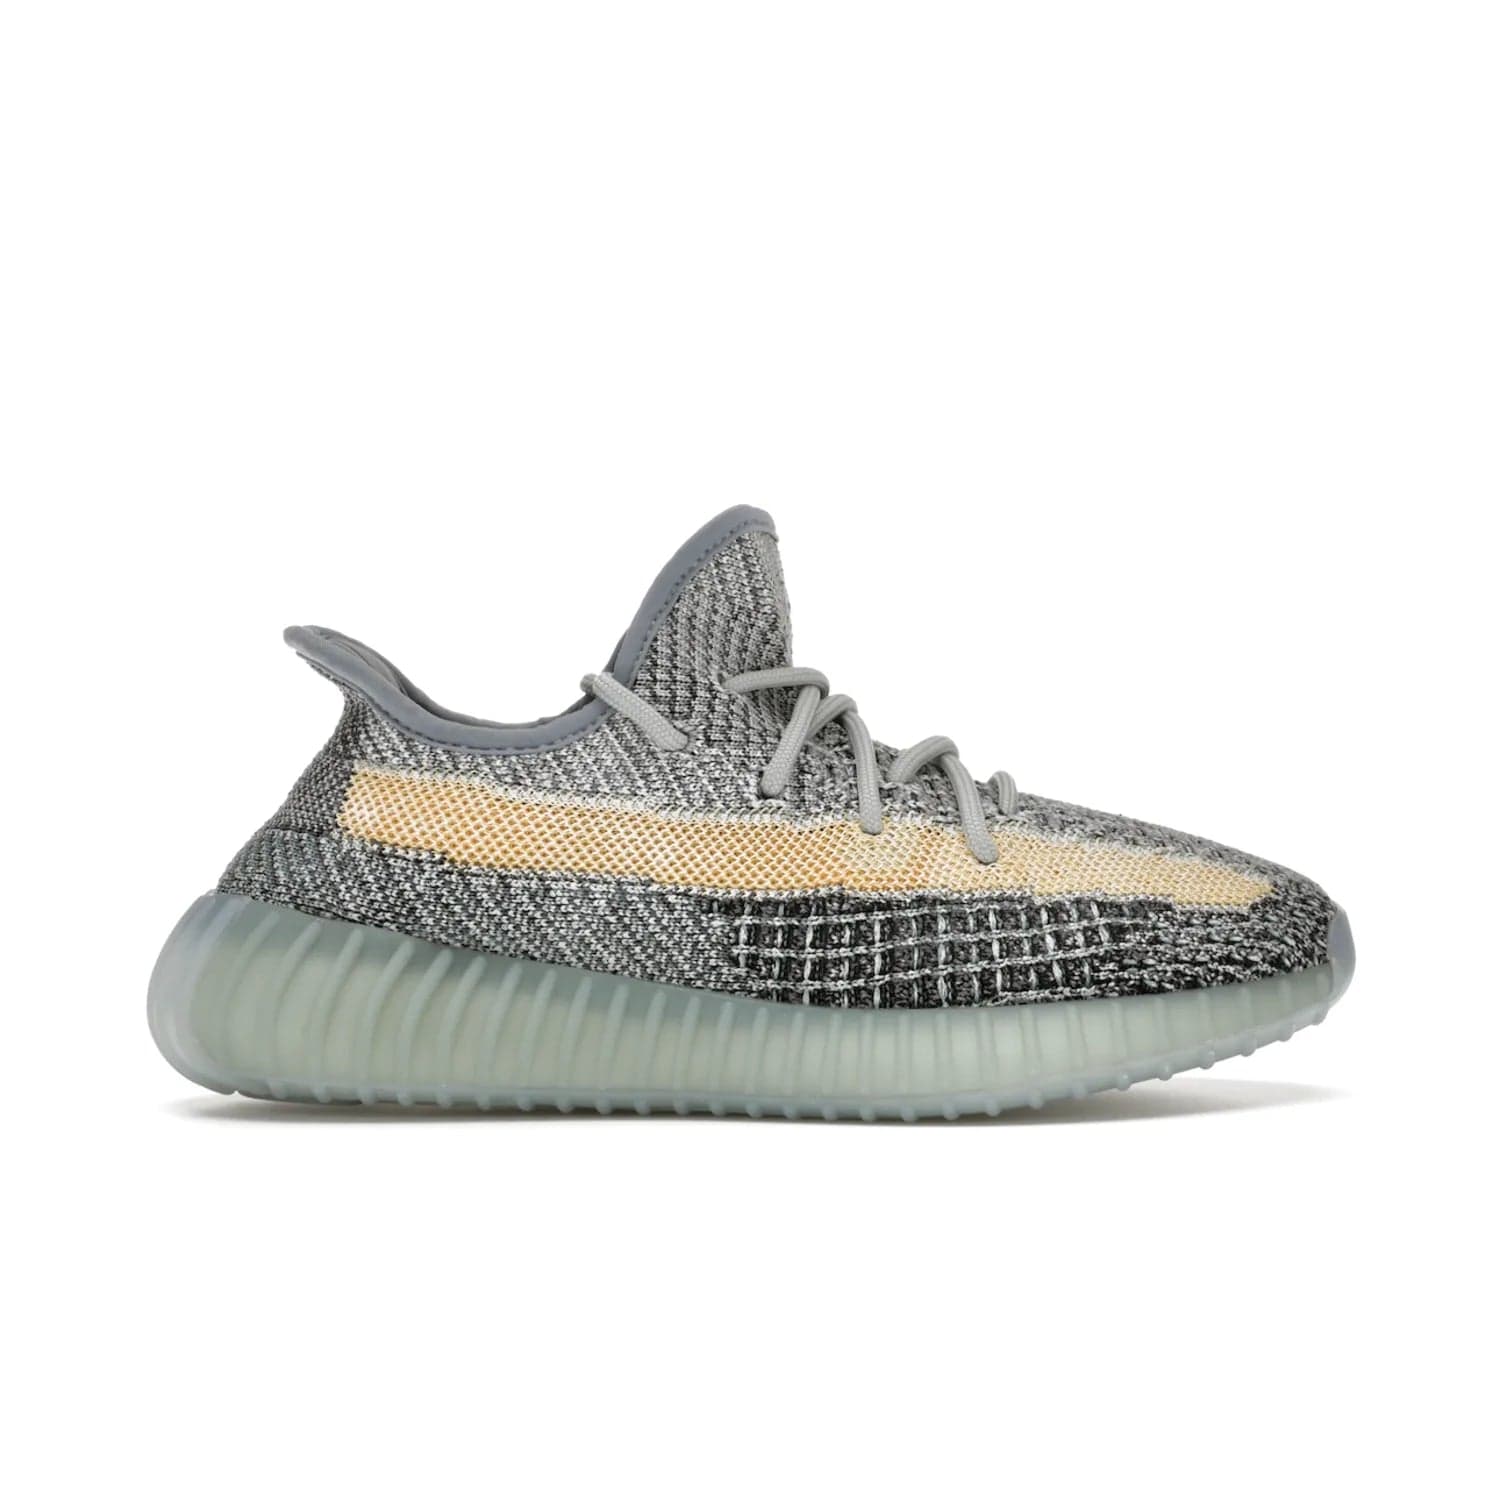 adidas Yeezy Boost 350 V2 Ash Blue - Image 1 - Only at www.BallersClubKickz.com - Must-have design made of engineered primeknit upper, comfortable sock-like upper and full-length Boost midsole, and semi-translucent rubber cage for added durability and style. The adidas Yeezy Boost 350 V2 Ash Blue blends timeless colors and comfort.